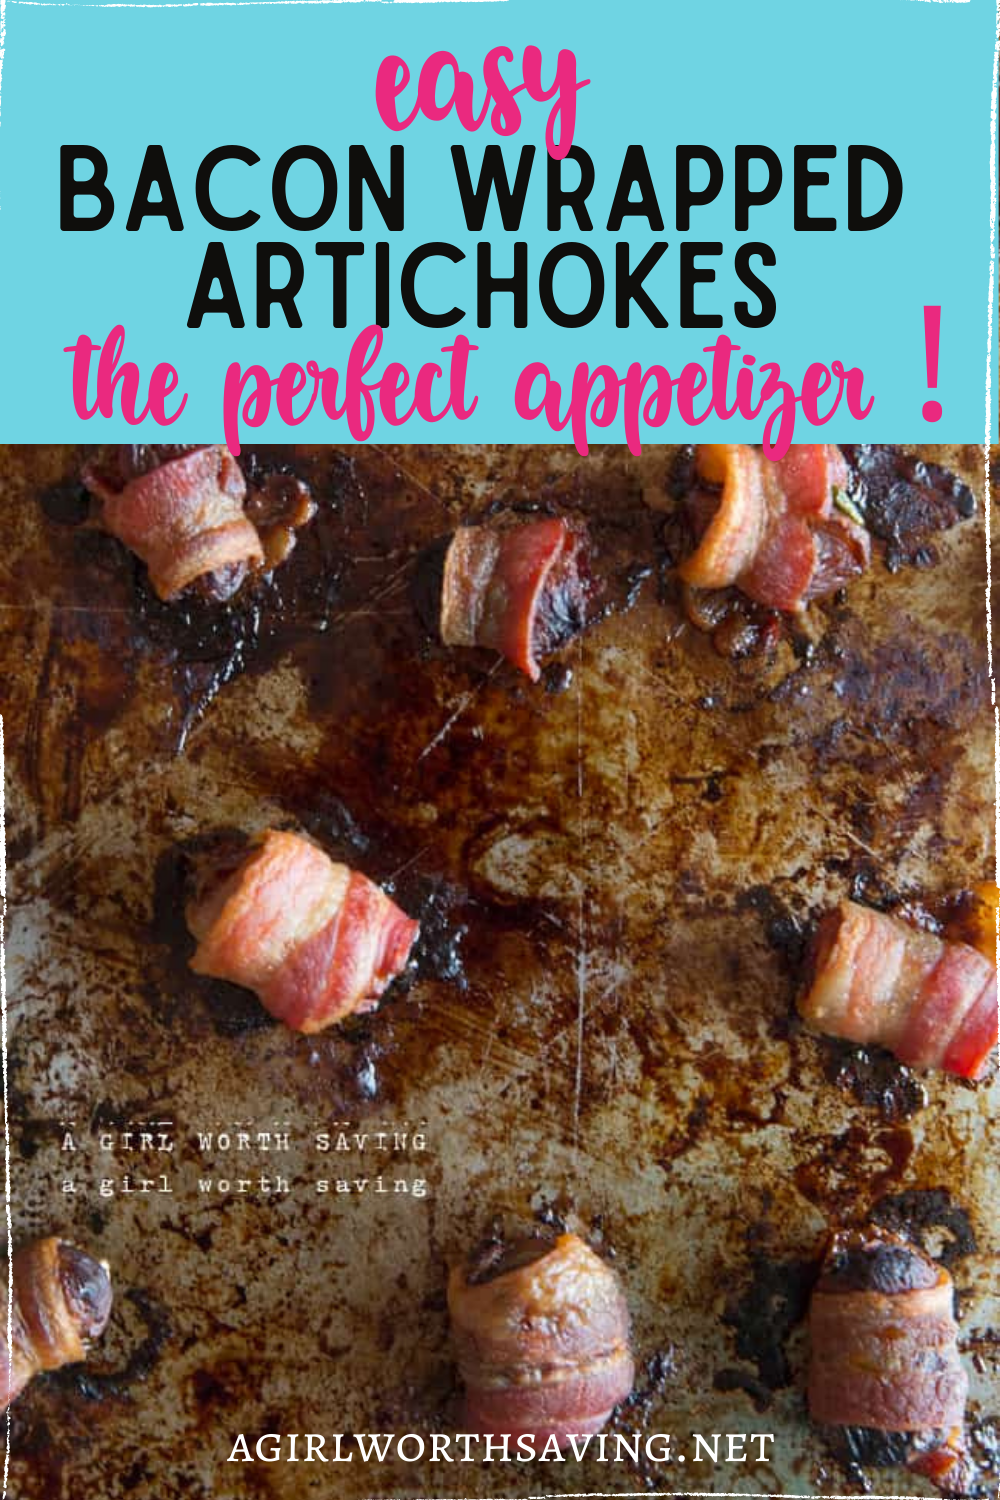 No one will be able to resist Zingers also known as bacon wrapped apricots with a spicy surprise inside. They make the perfect appetizer for your family gathering.